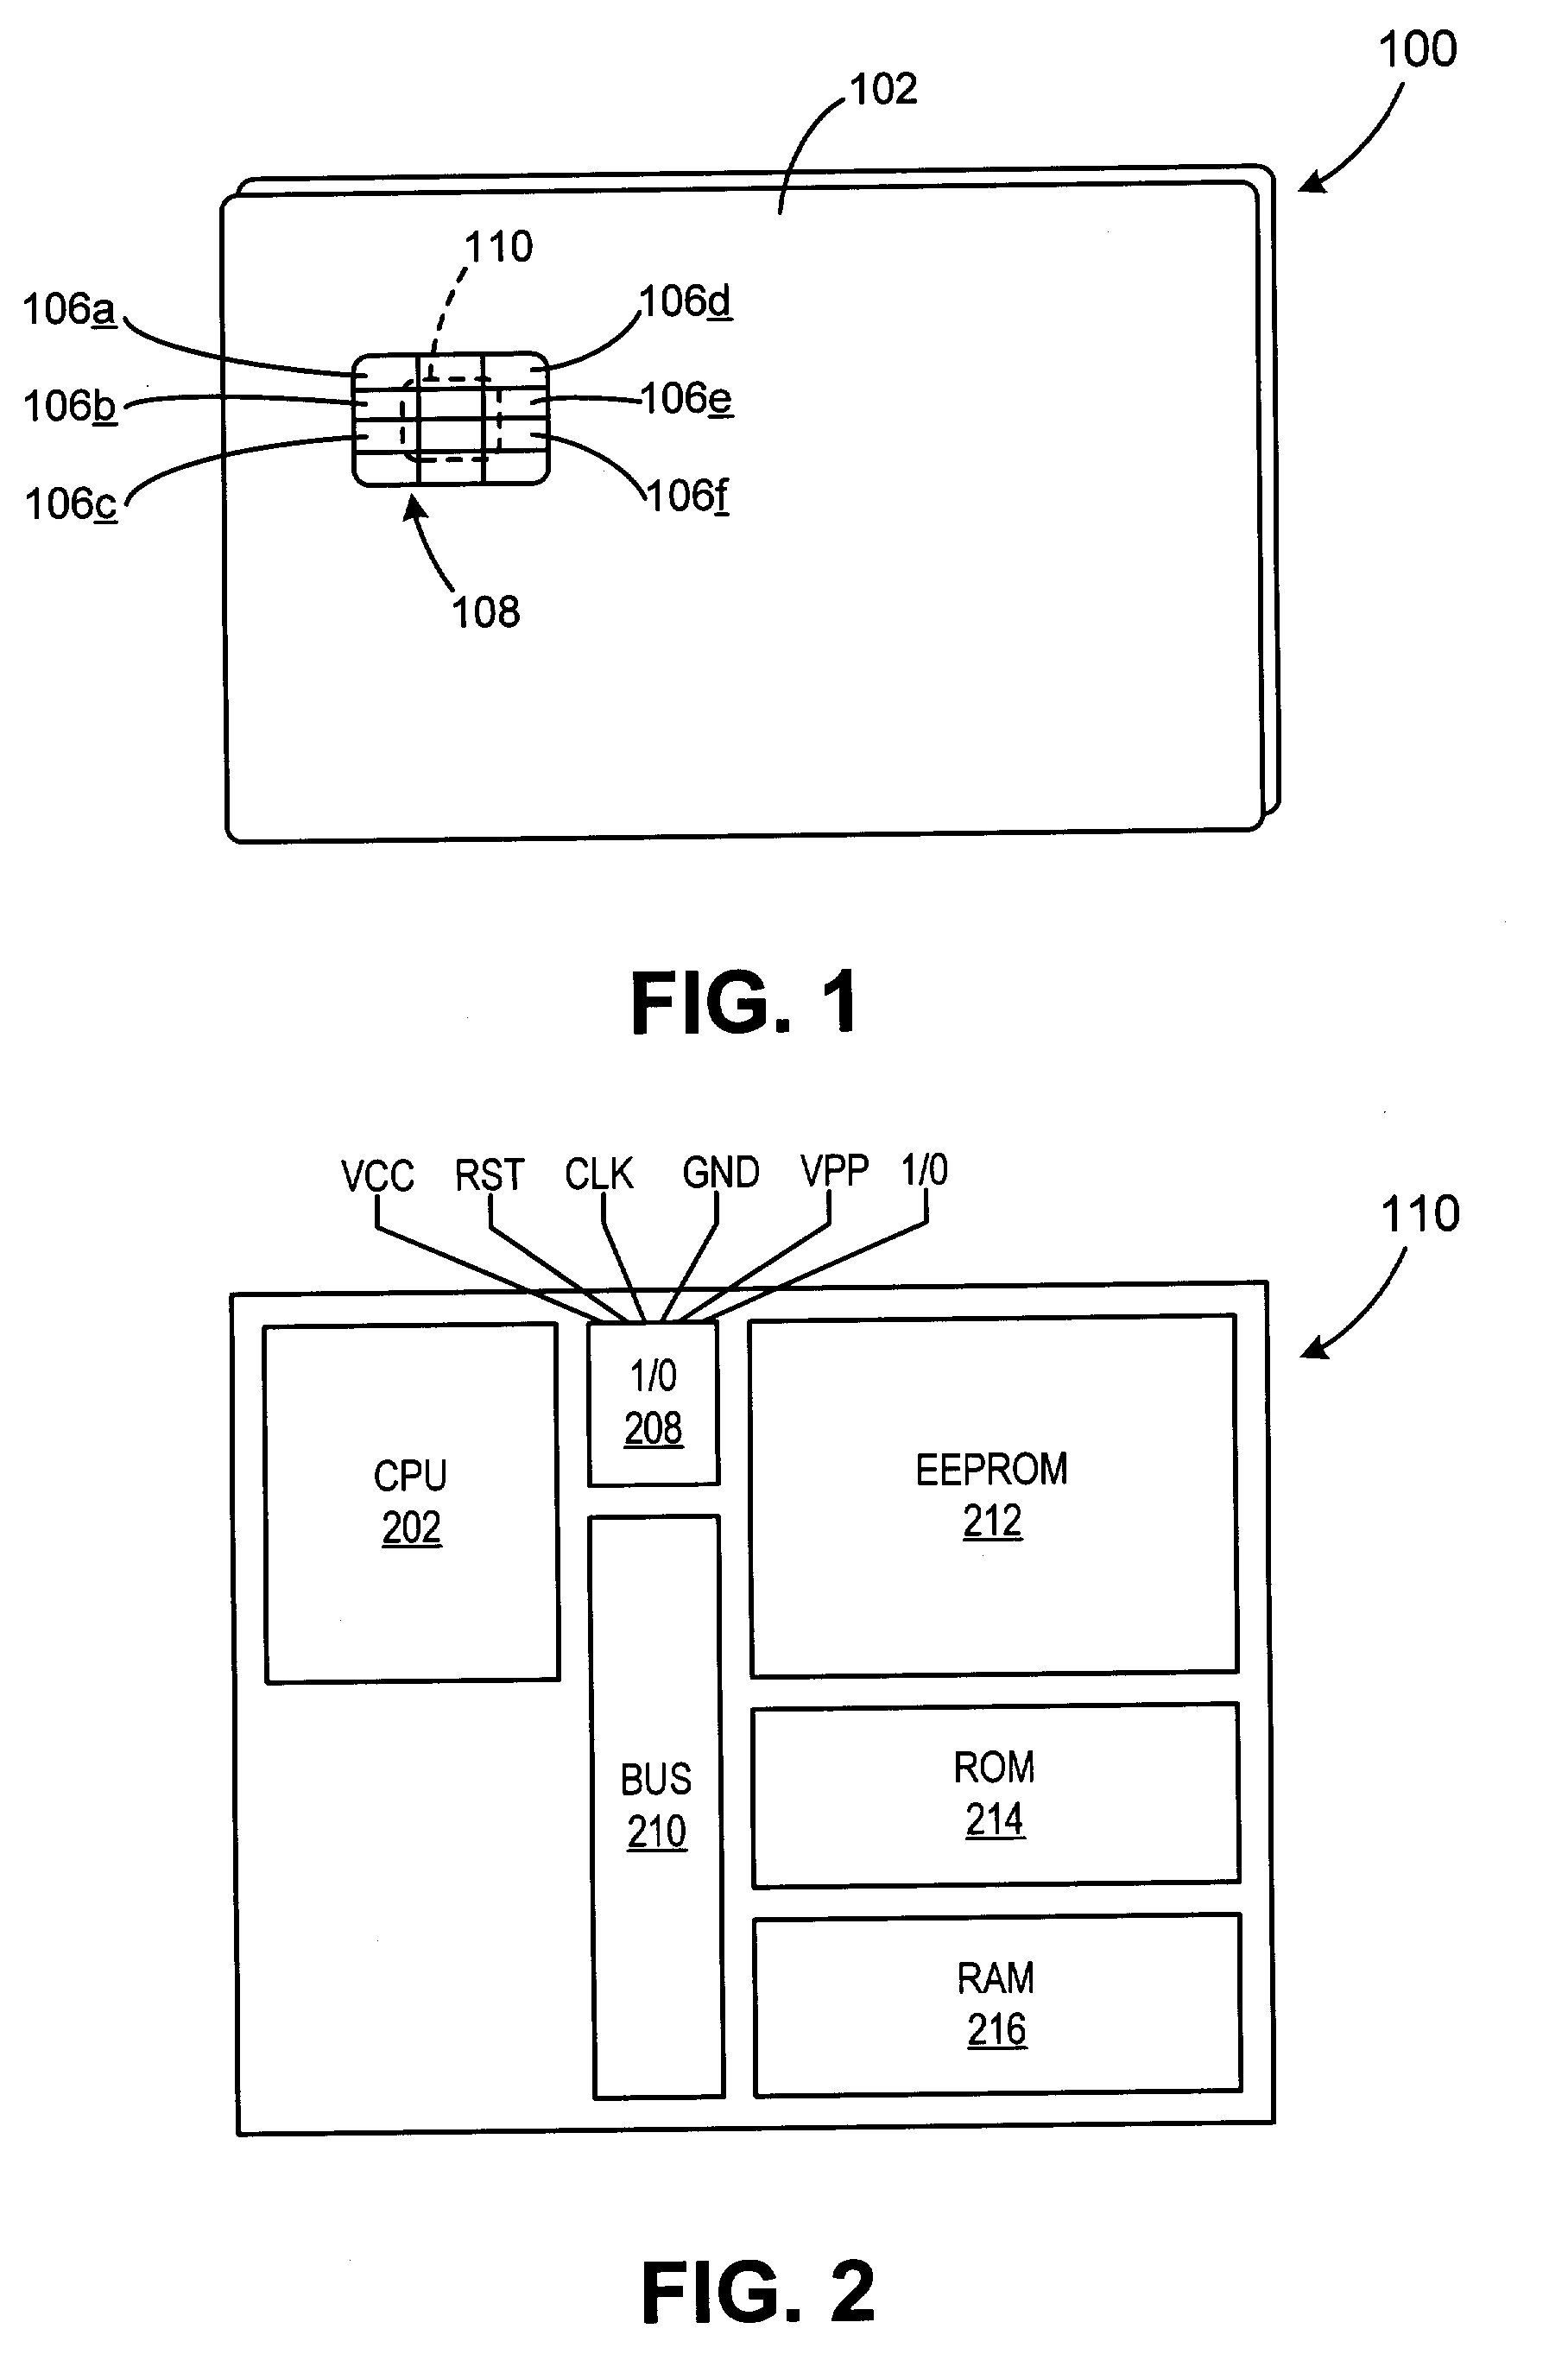 Method and system for facial recognition biometrics on a smartcard